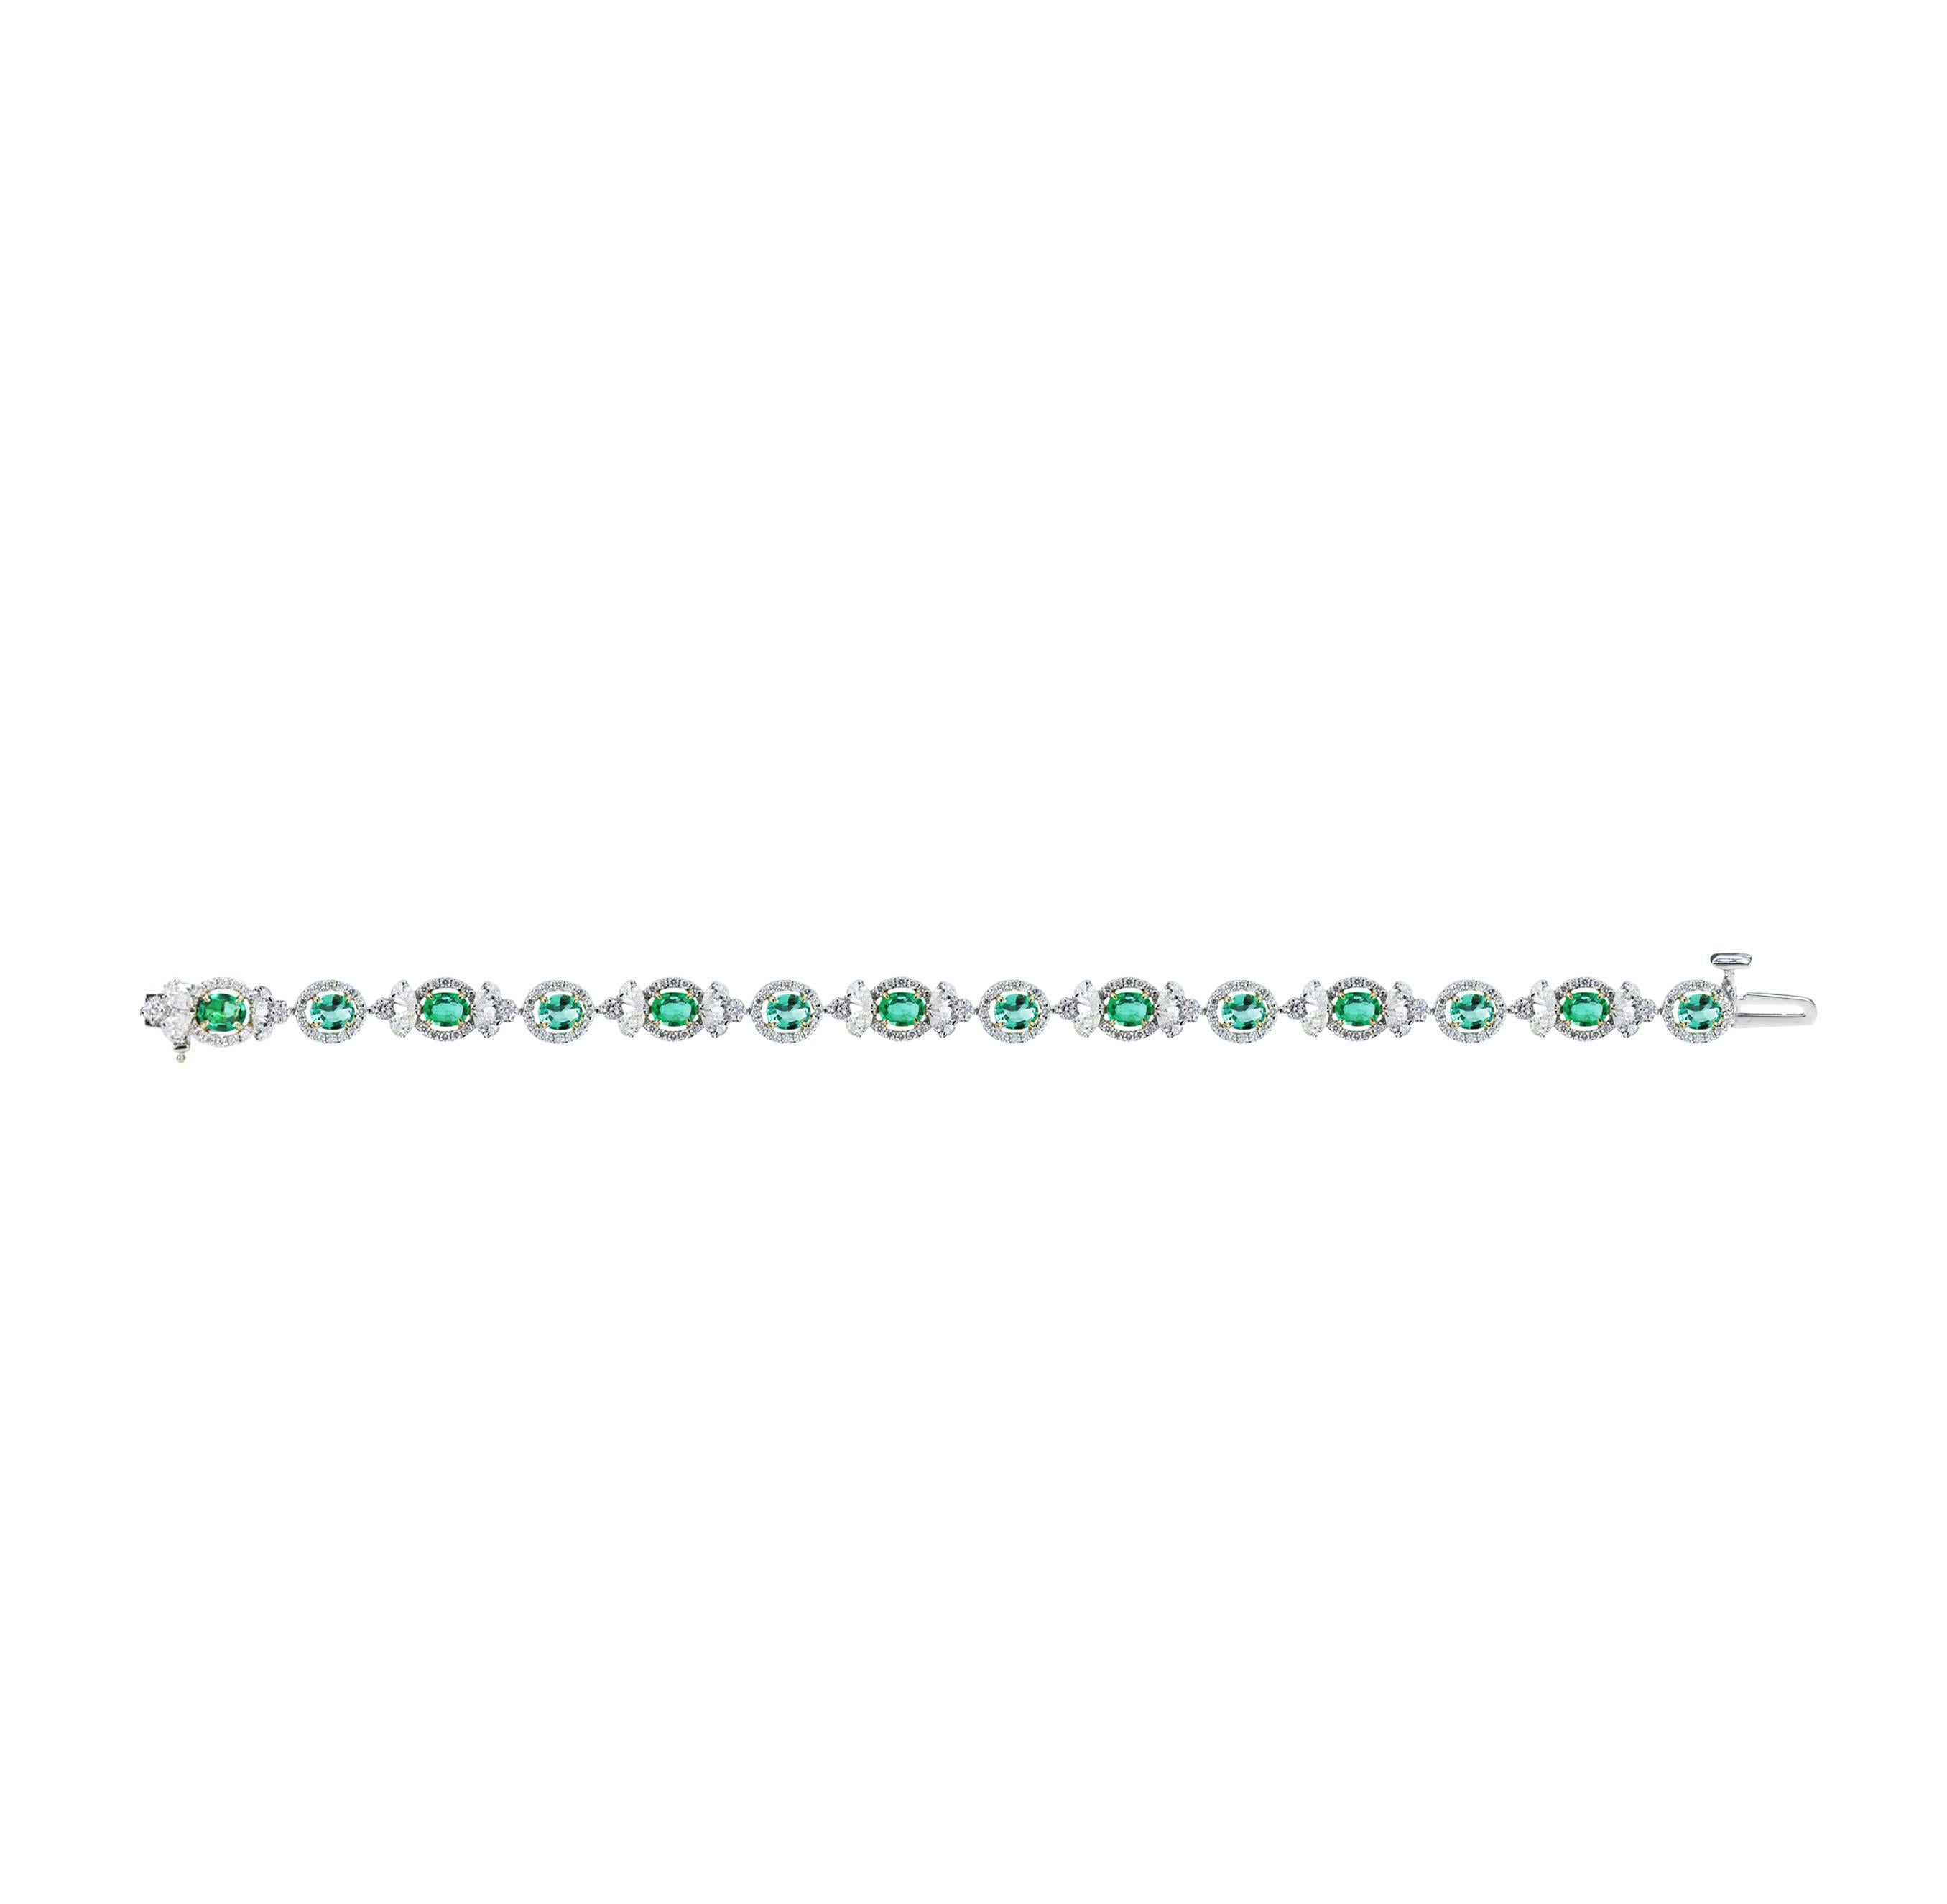 Diamond and emerald bracelet

A darling bracelet crafted using 18K white gold and studded with pear and round brilliant cut diamonds and emeralds, set in a prong setting is an heirloom-worthy collectible. This is the kind of design that will become